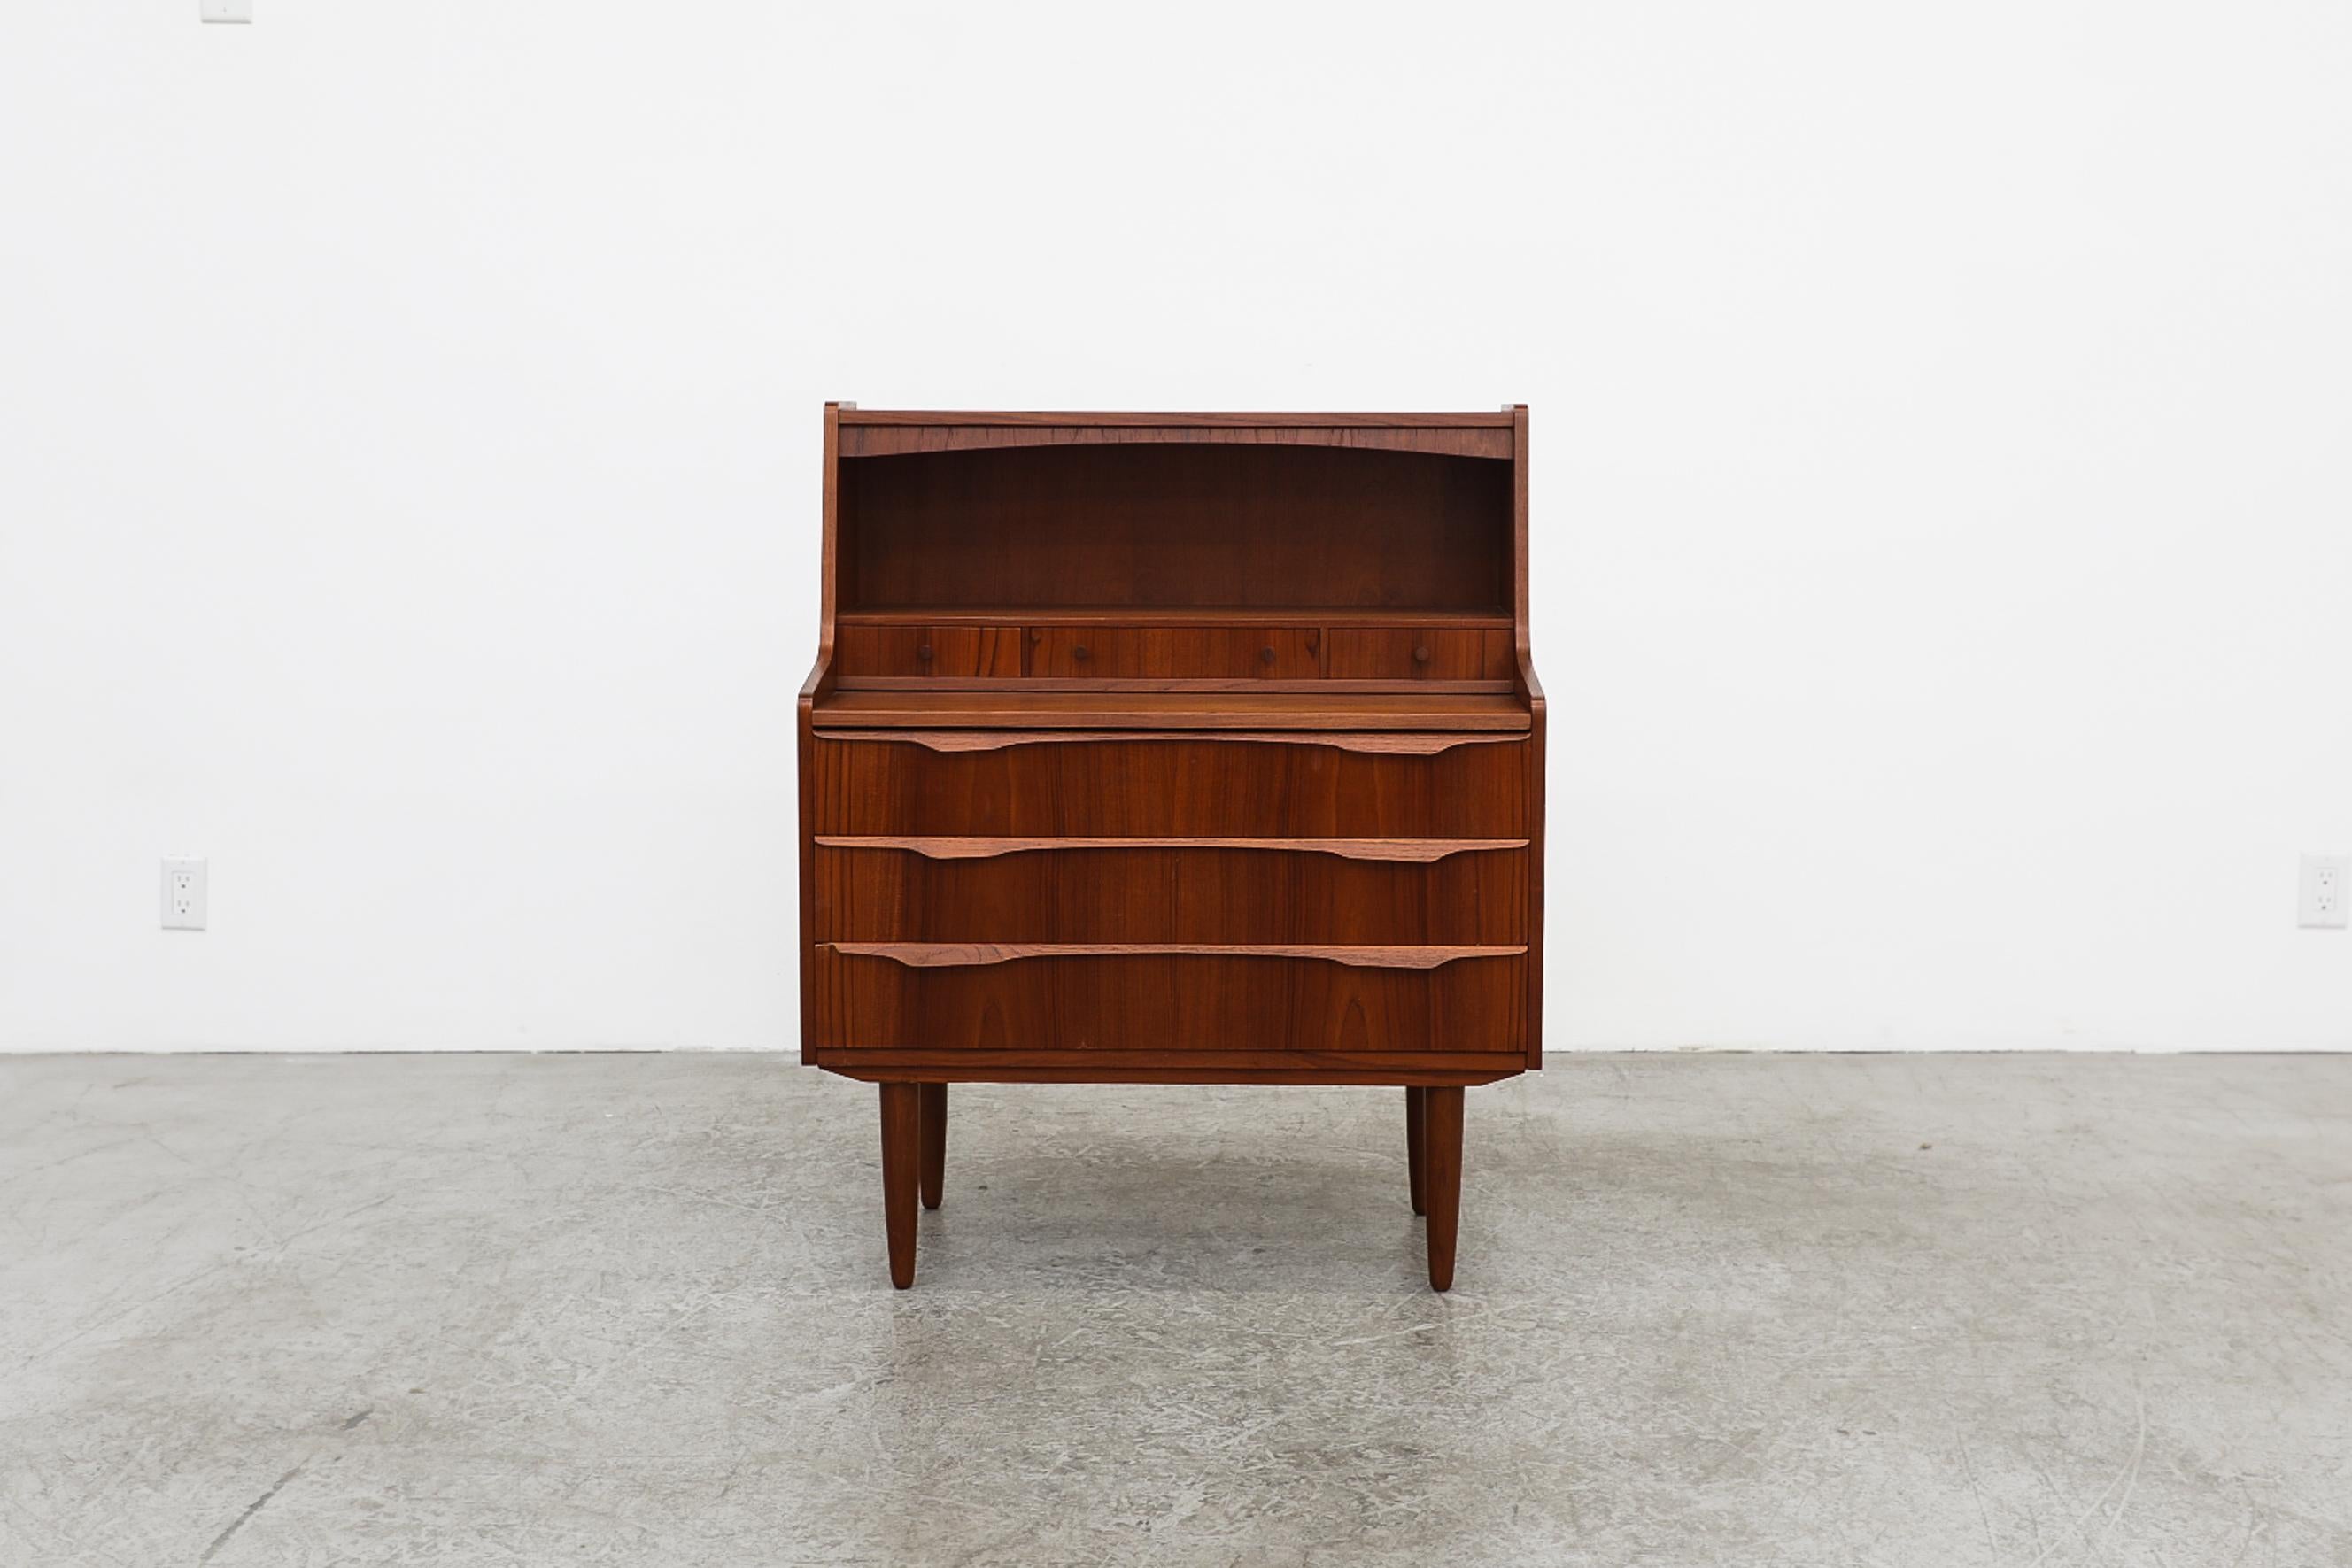 Little Mid-Century Danish teak vanity, desk or dresser with tapered legs. Lightly refinished with pull-out desk and little drawers and compartments on top with lower stacked dresser drawers. In good overall original condition with wear and